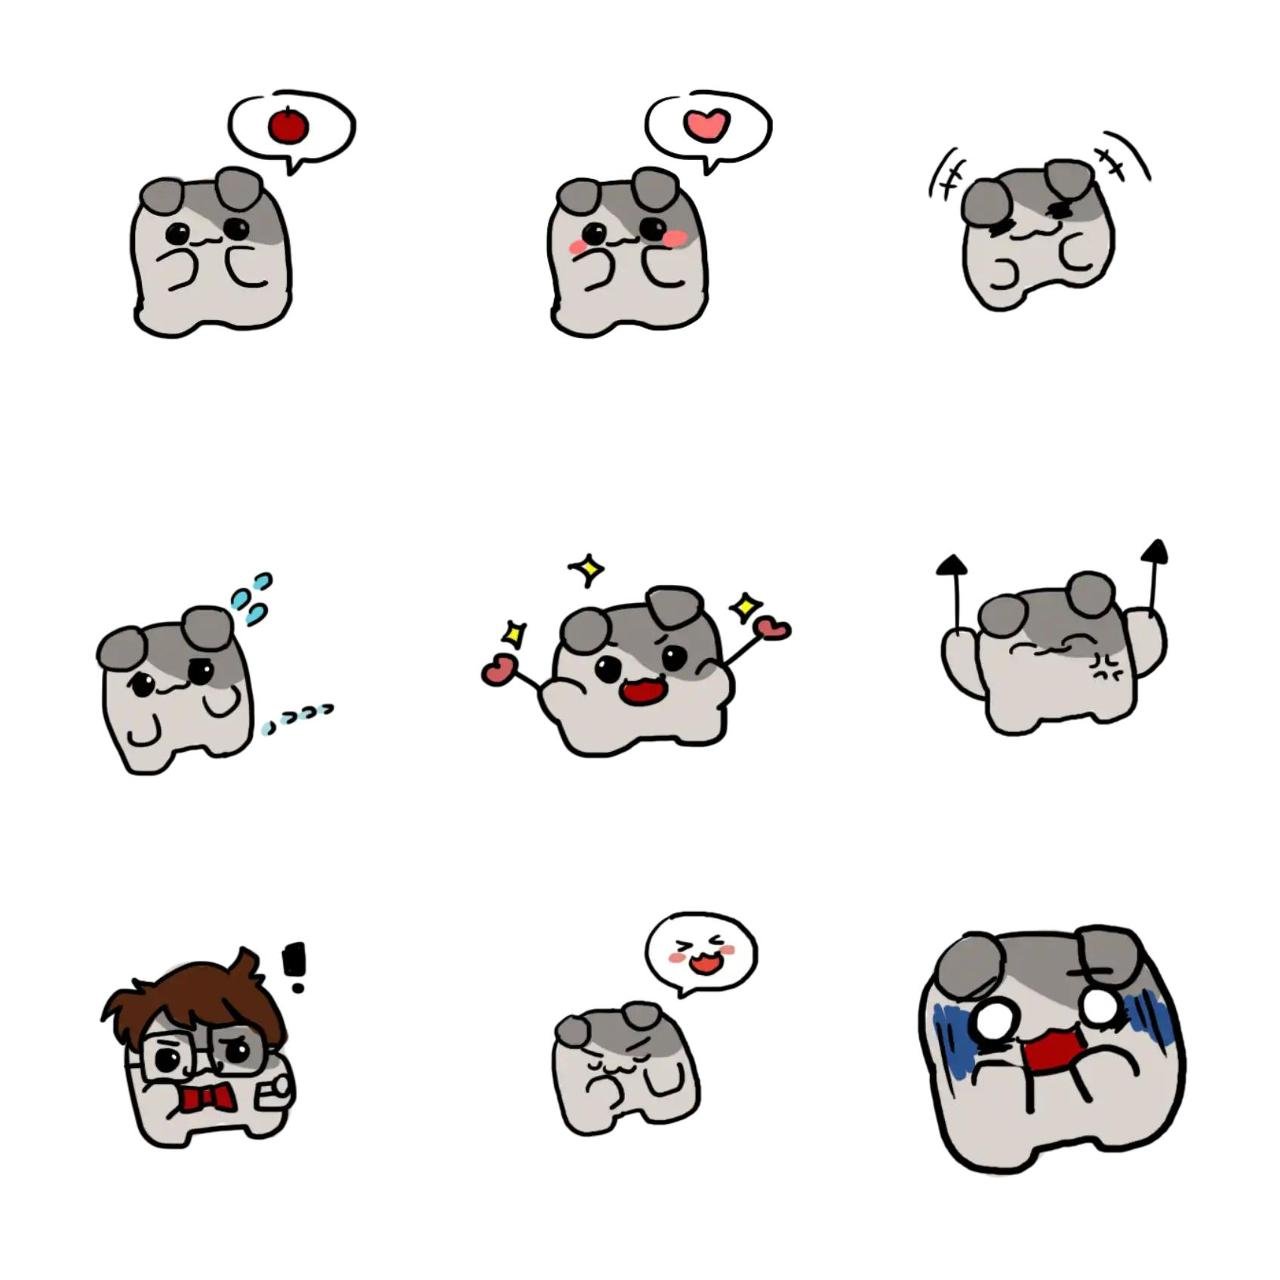 It's just a little cute puppy, Faro Animation/Cartoon,Animals sticker pack for Whatsapp, Telegram, Signal, and others chatting and message apps